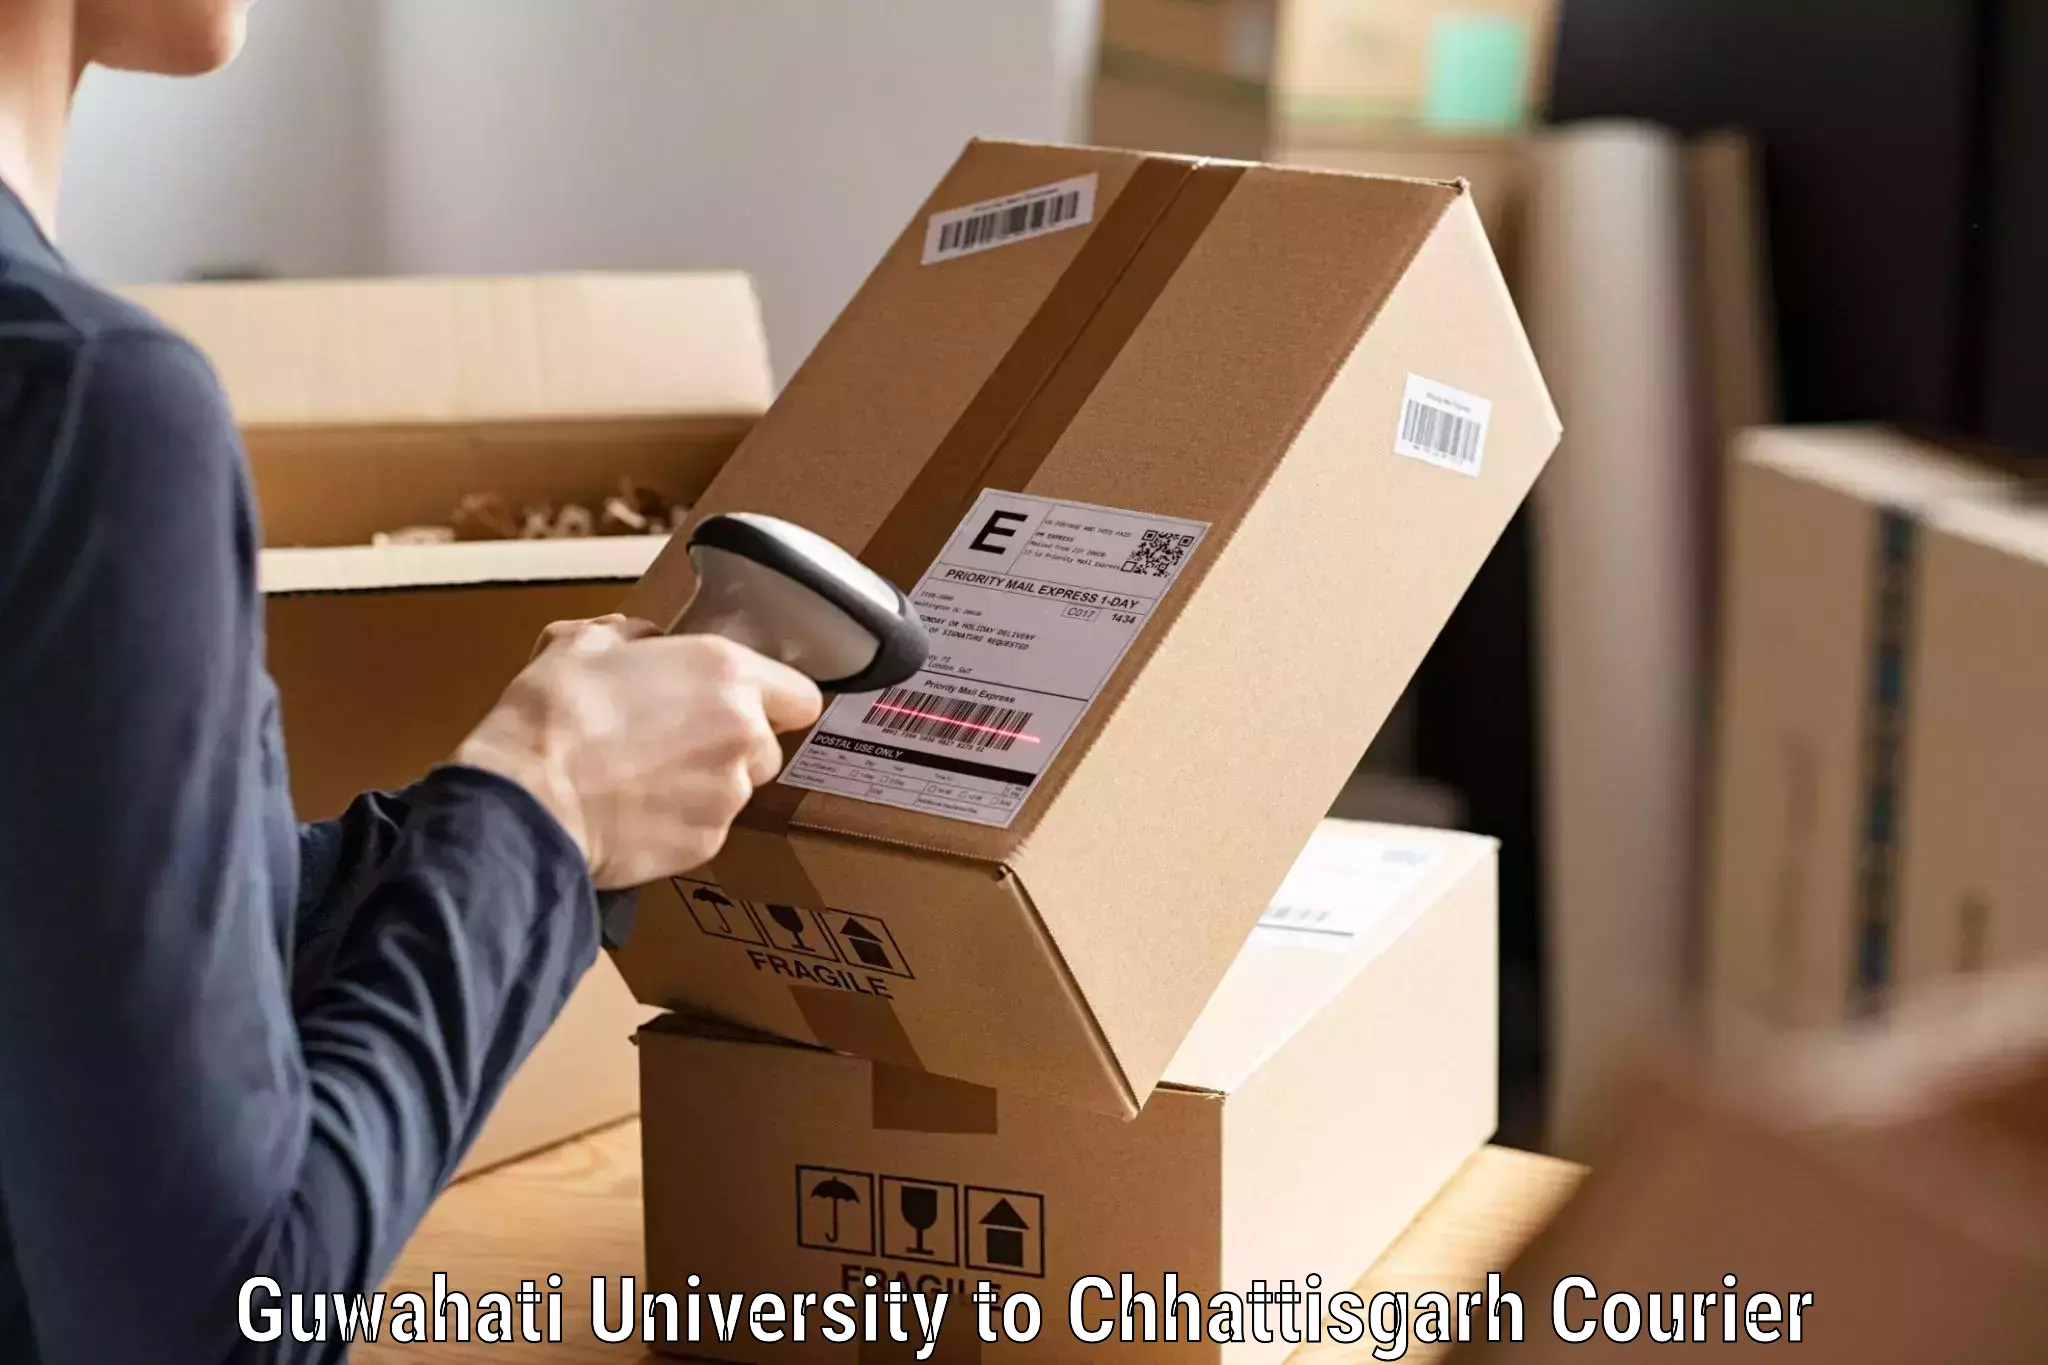 Automated parcel services Guwahati University to Durg